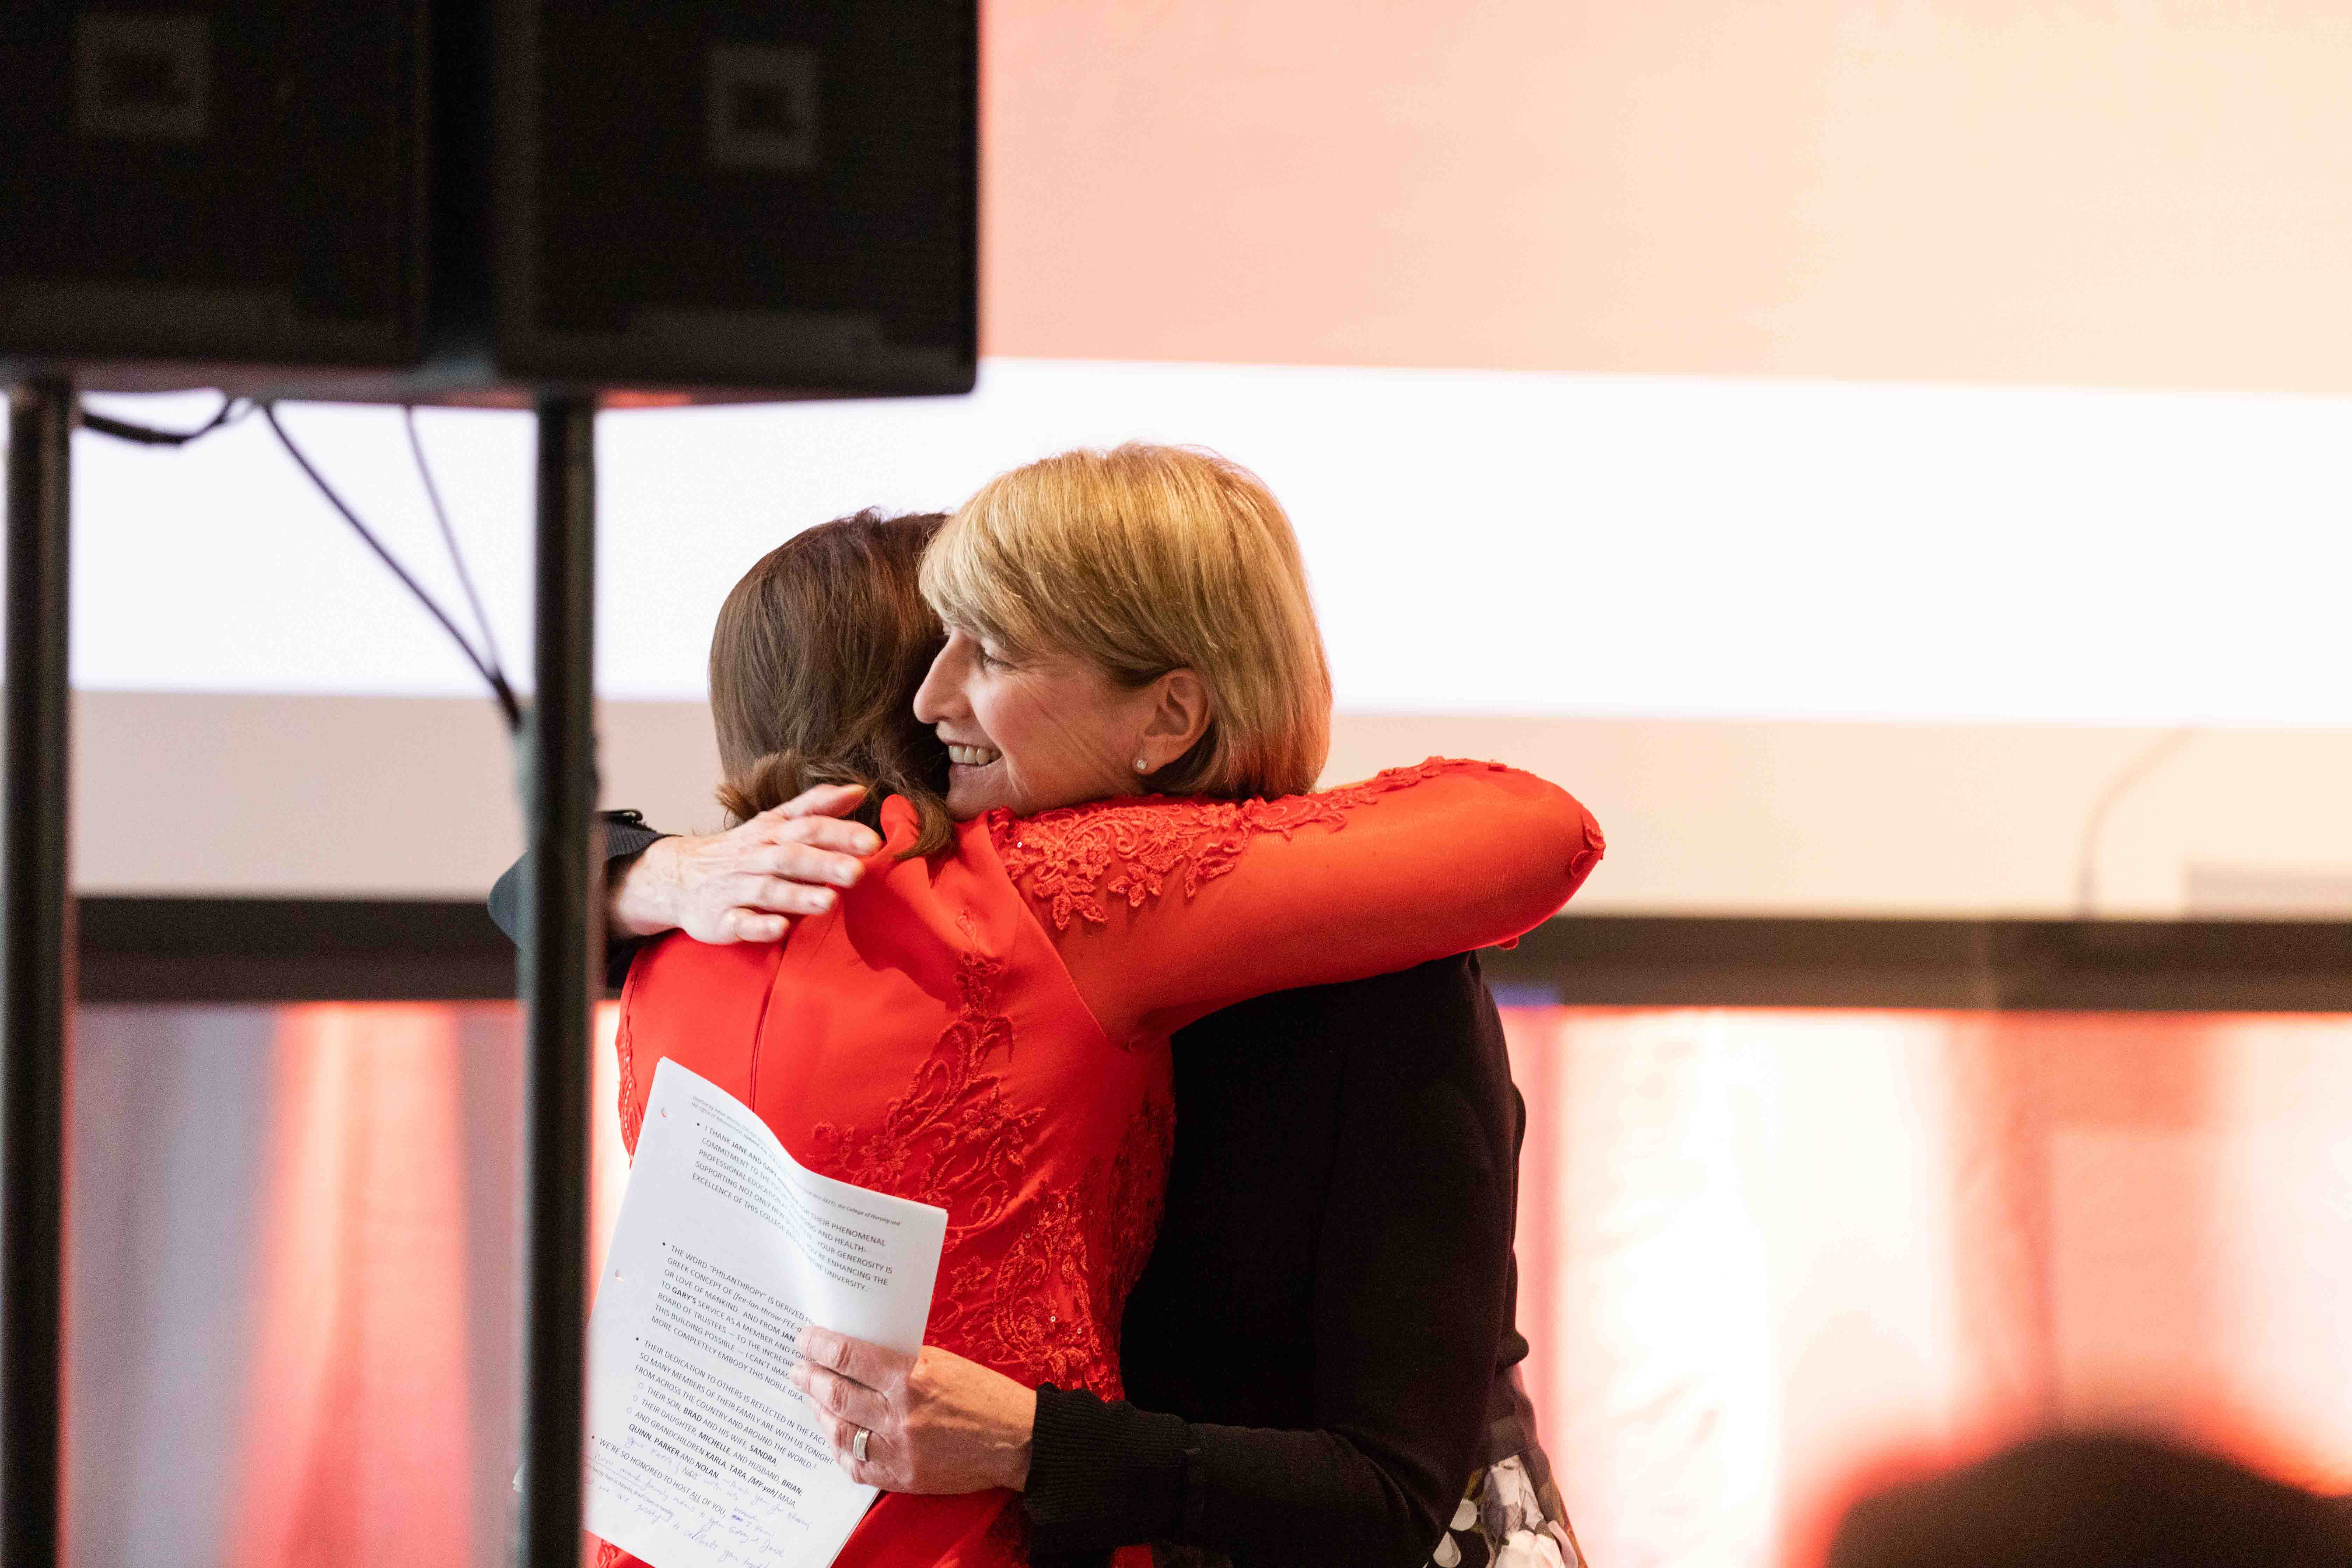 Dean Melnyk and President Kristina M. Johnson embrace at our grand opening gala